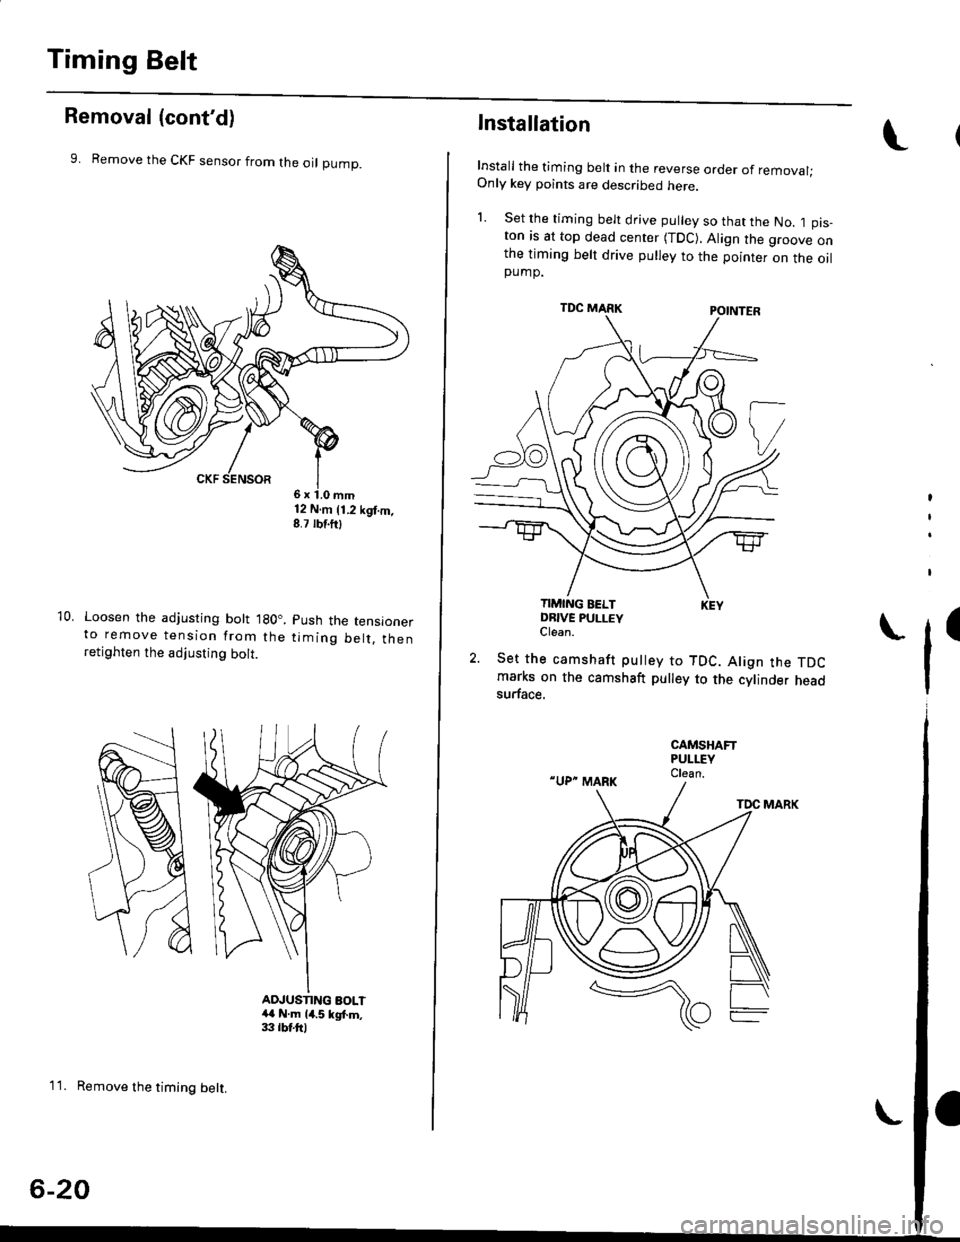 HONDA CIVIC 1998 6.G Owners Manual Timing Belt
Removal (contd)
9. Remove the CKF sensor from the oI pump.
10. Loosen the adjusting bott lgO..to remove tension from theretighten the adjusting bolt.
12 N.m 11.2 kgt.m,8.7 rbf.ftl
Push th